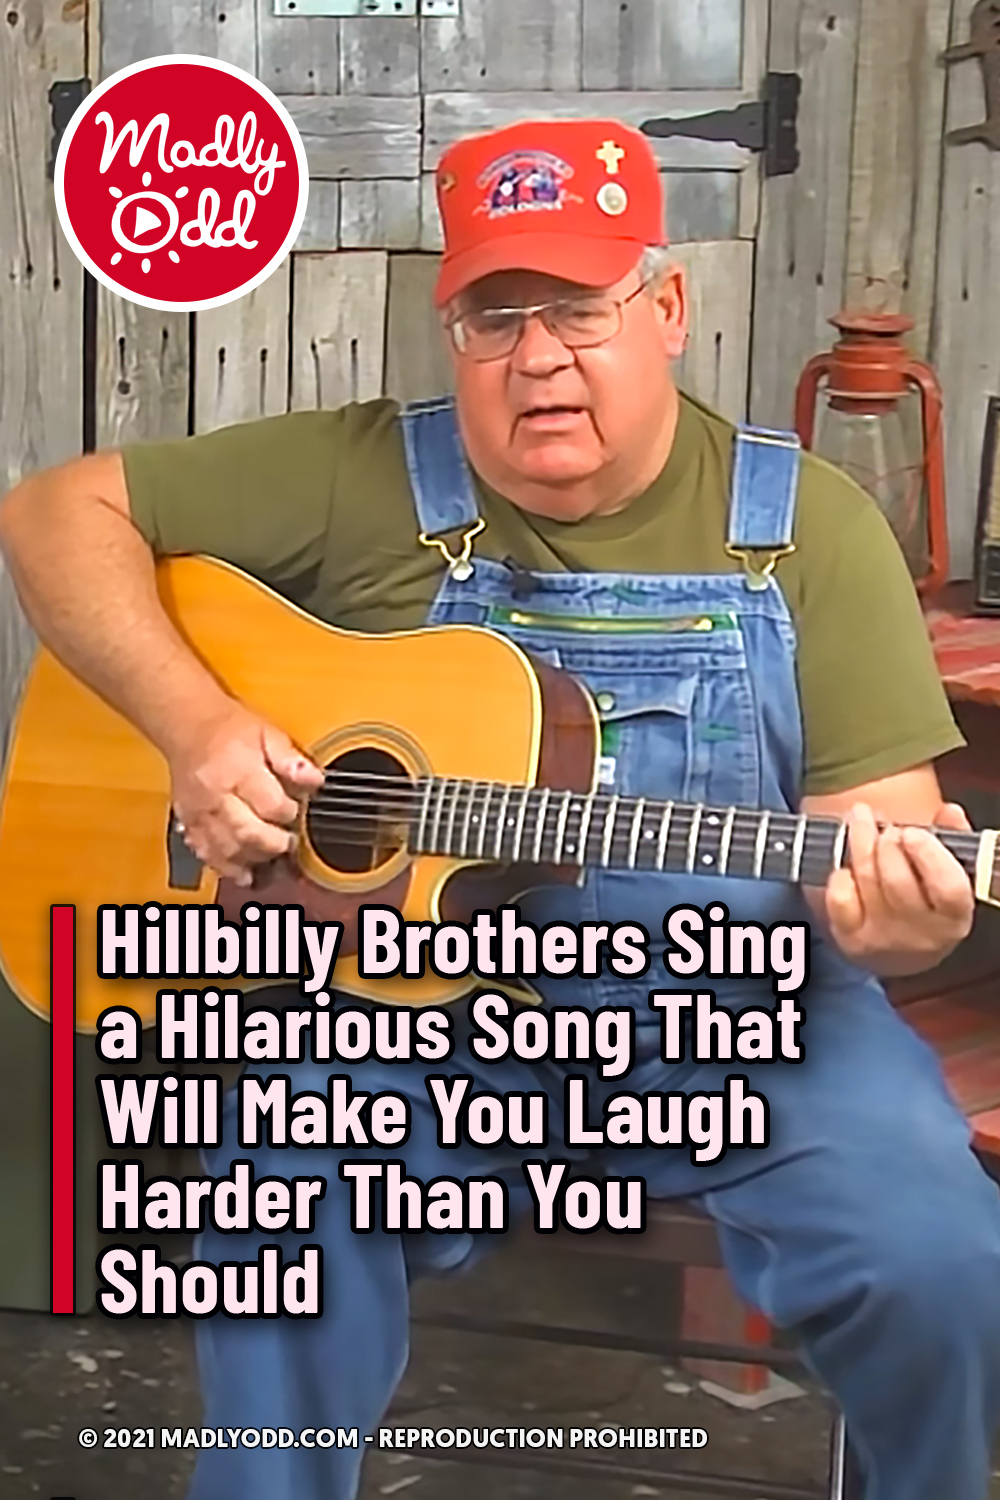 Hillbilly Brothers Sing a Hilarious Song That Will Make You Laugh Harder Than You Should